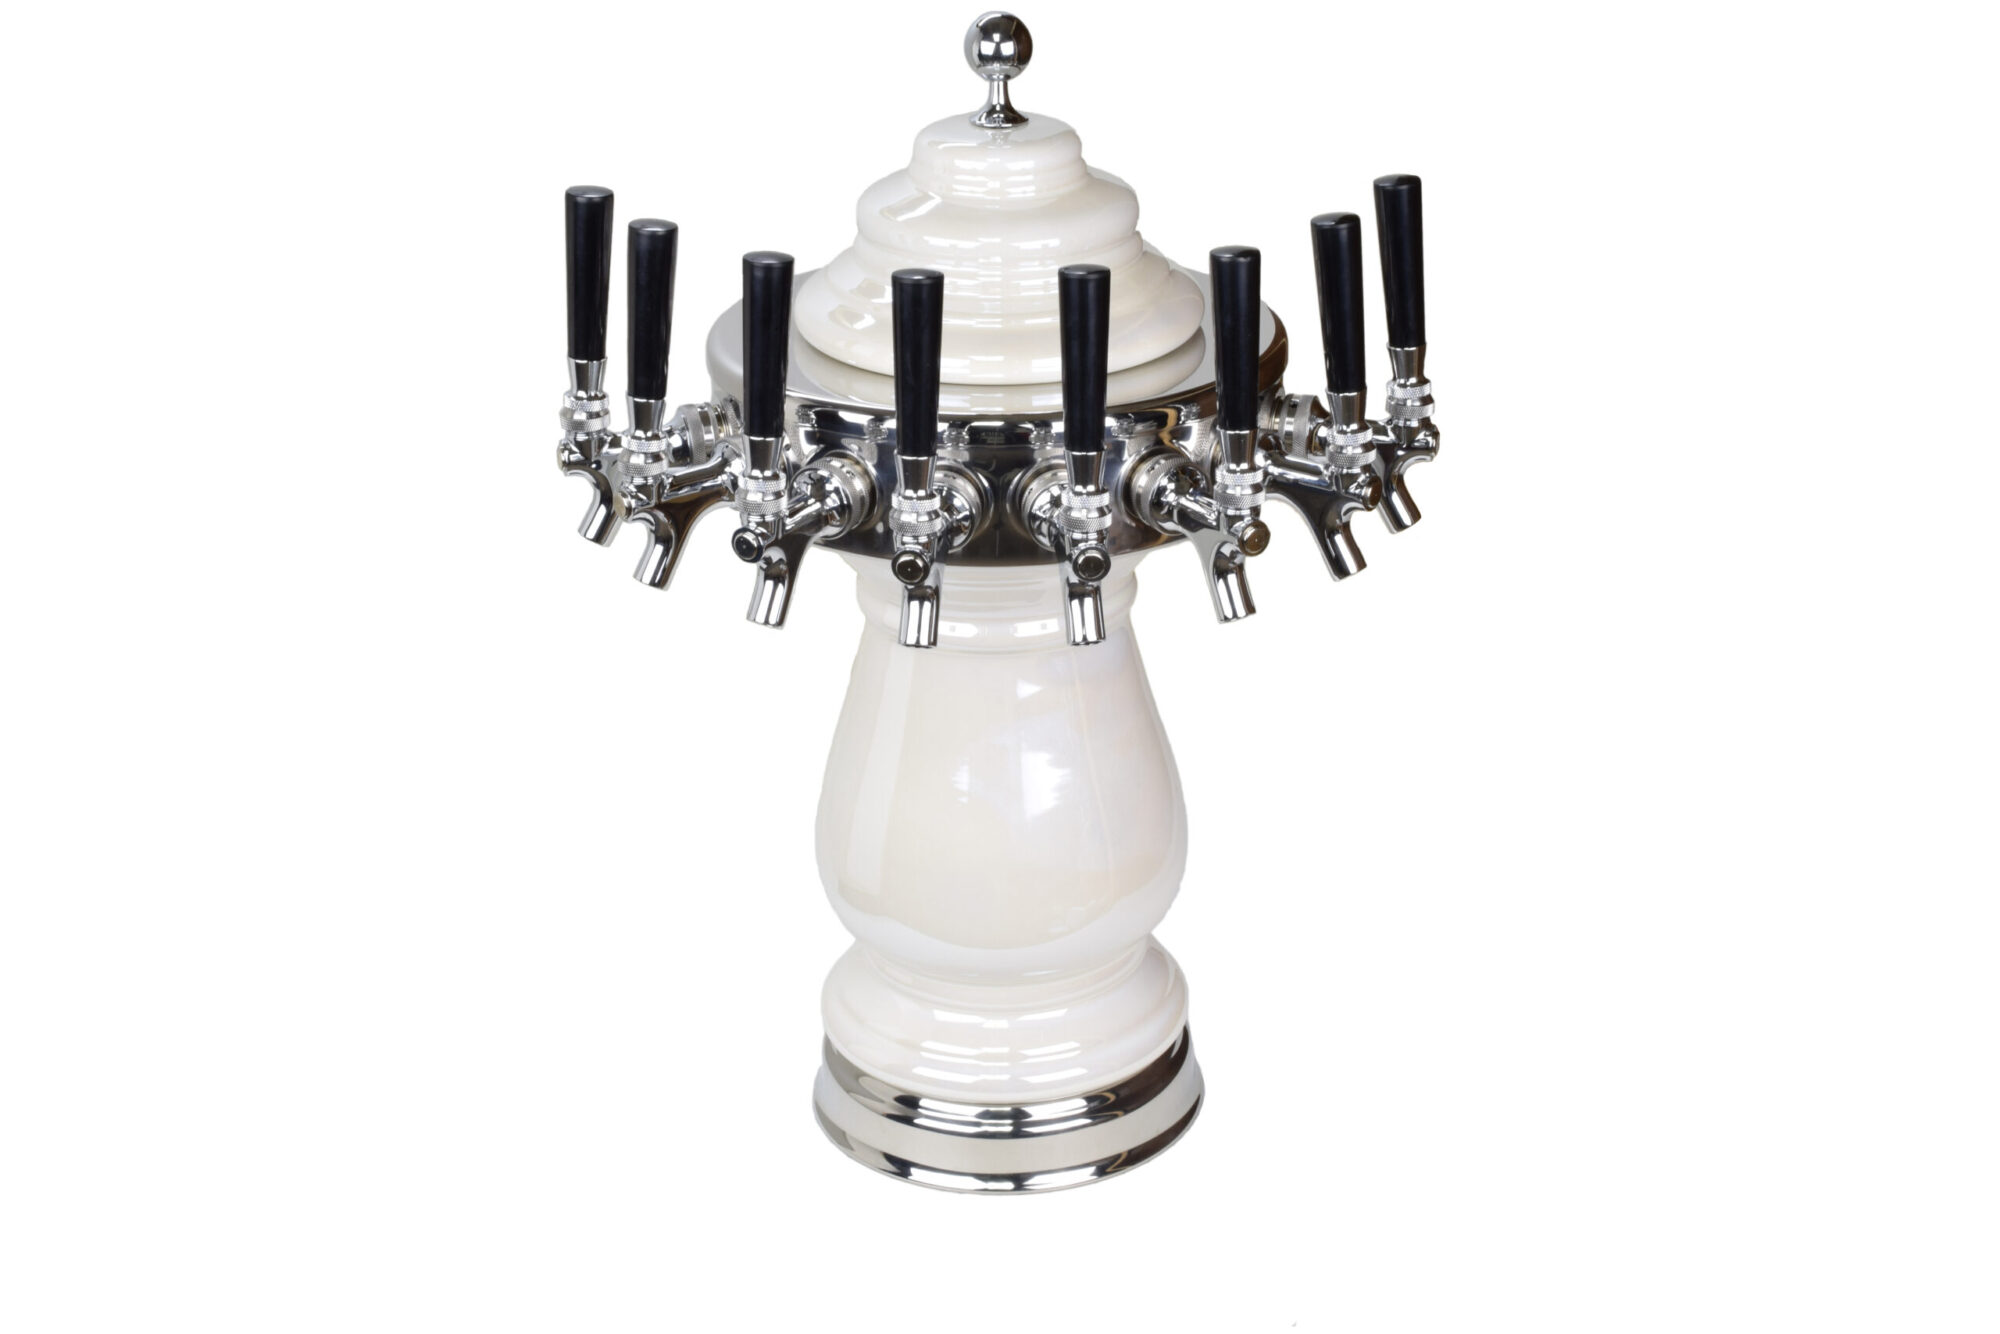 884C-8 -- Eight Faucet Ceramic Tower with Chrome Hardware and Faucets - Shown in Pearl White